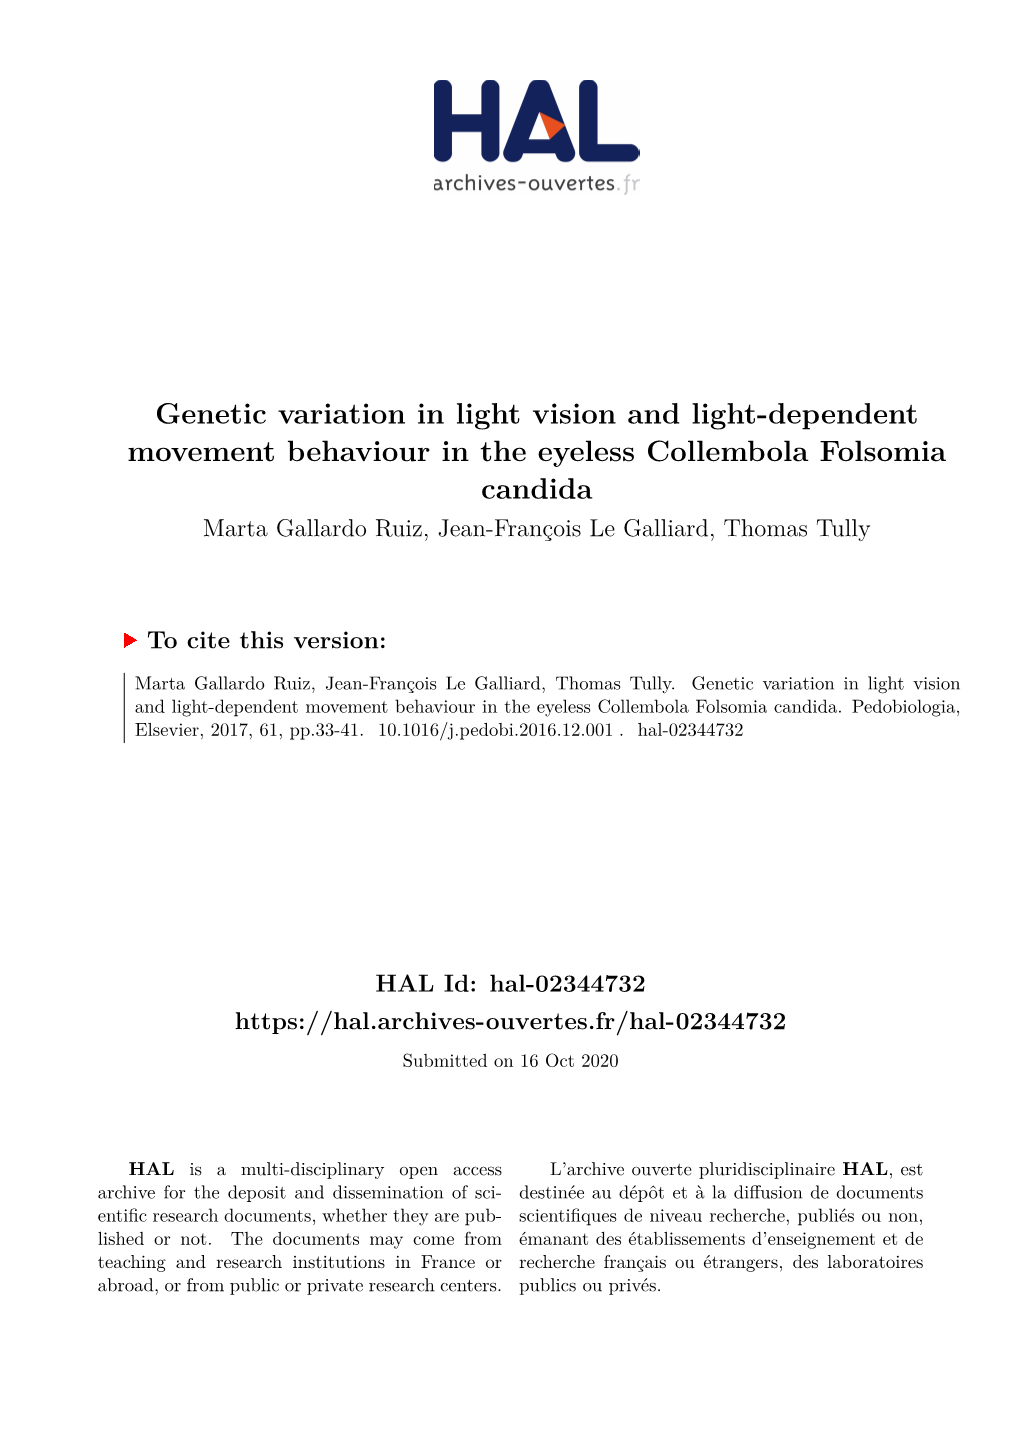 Genetic Variation in Light Vision and Light-Dependent Movement